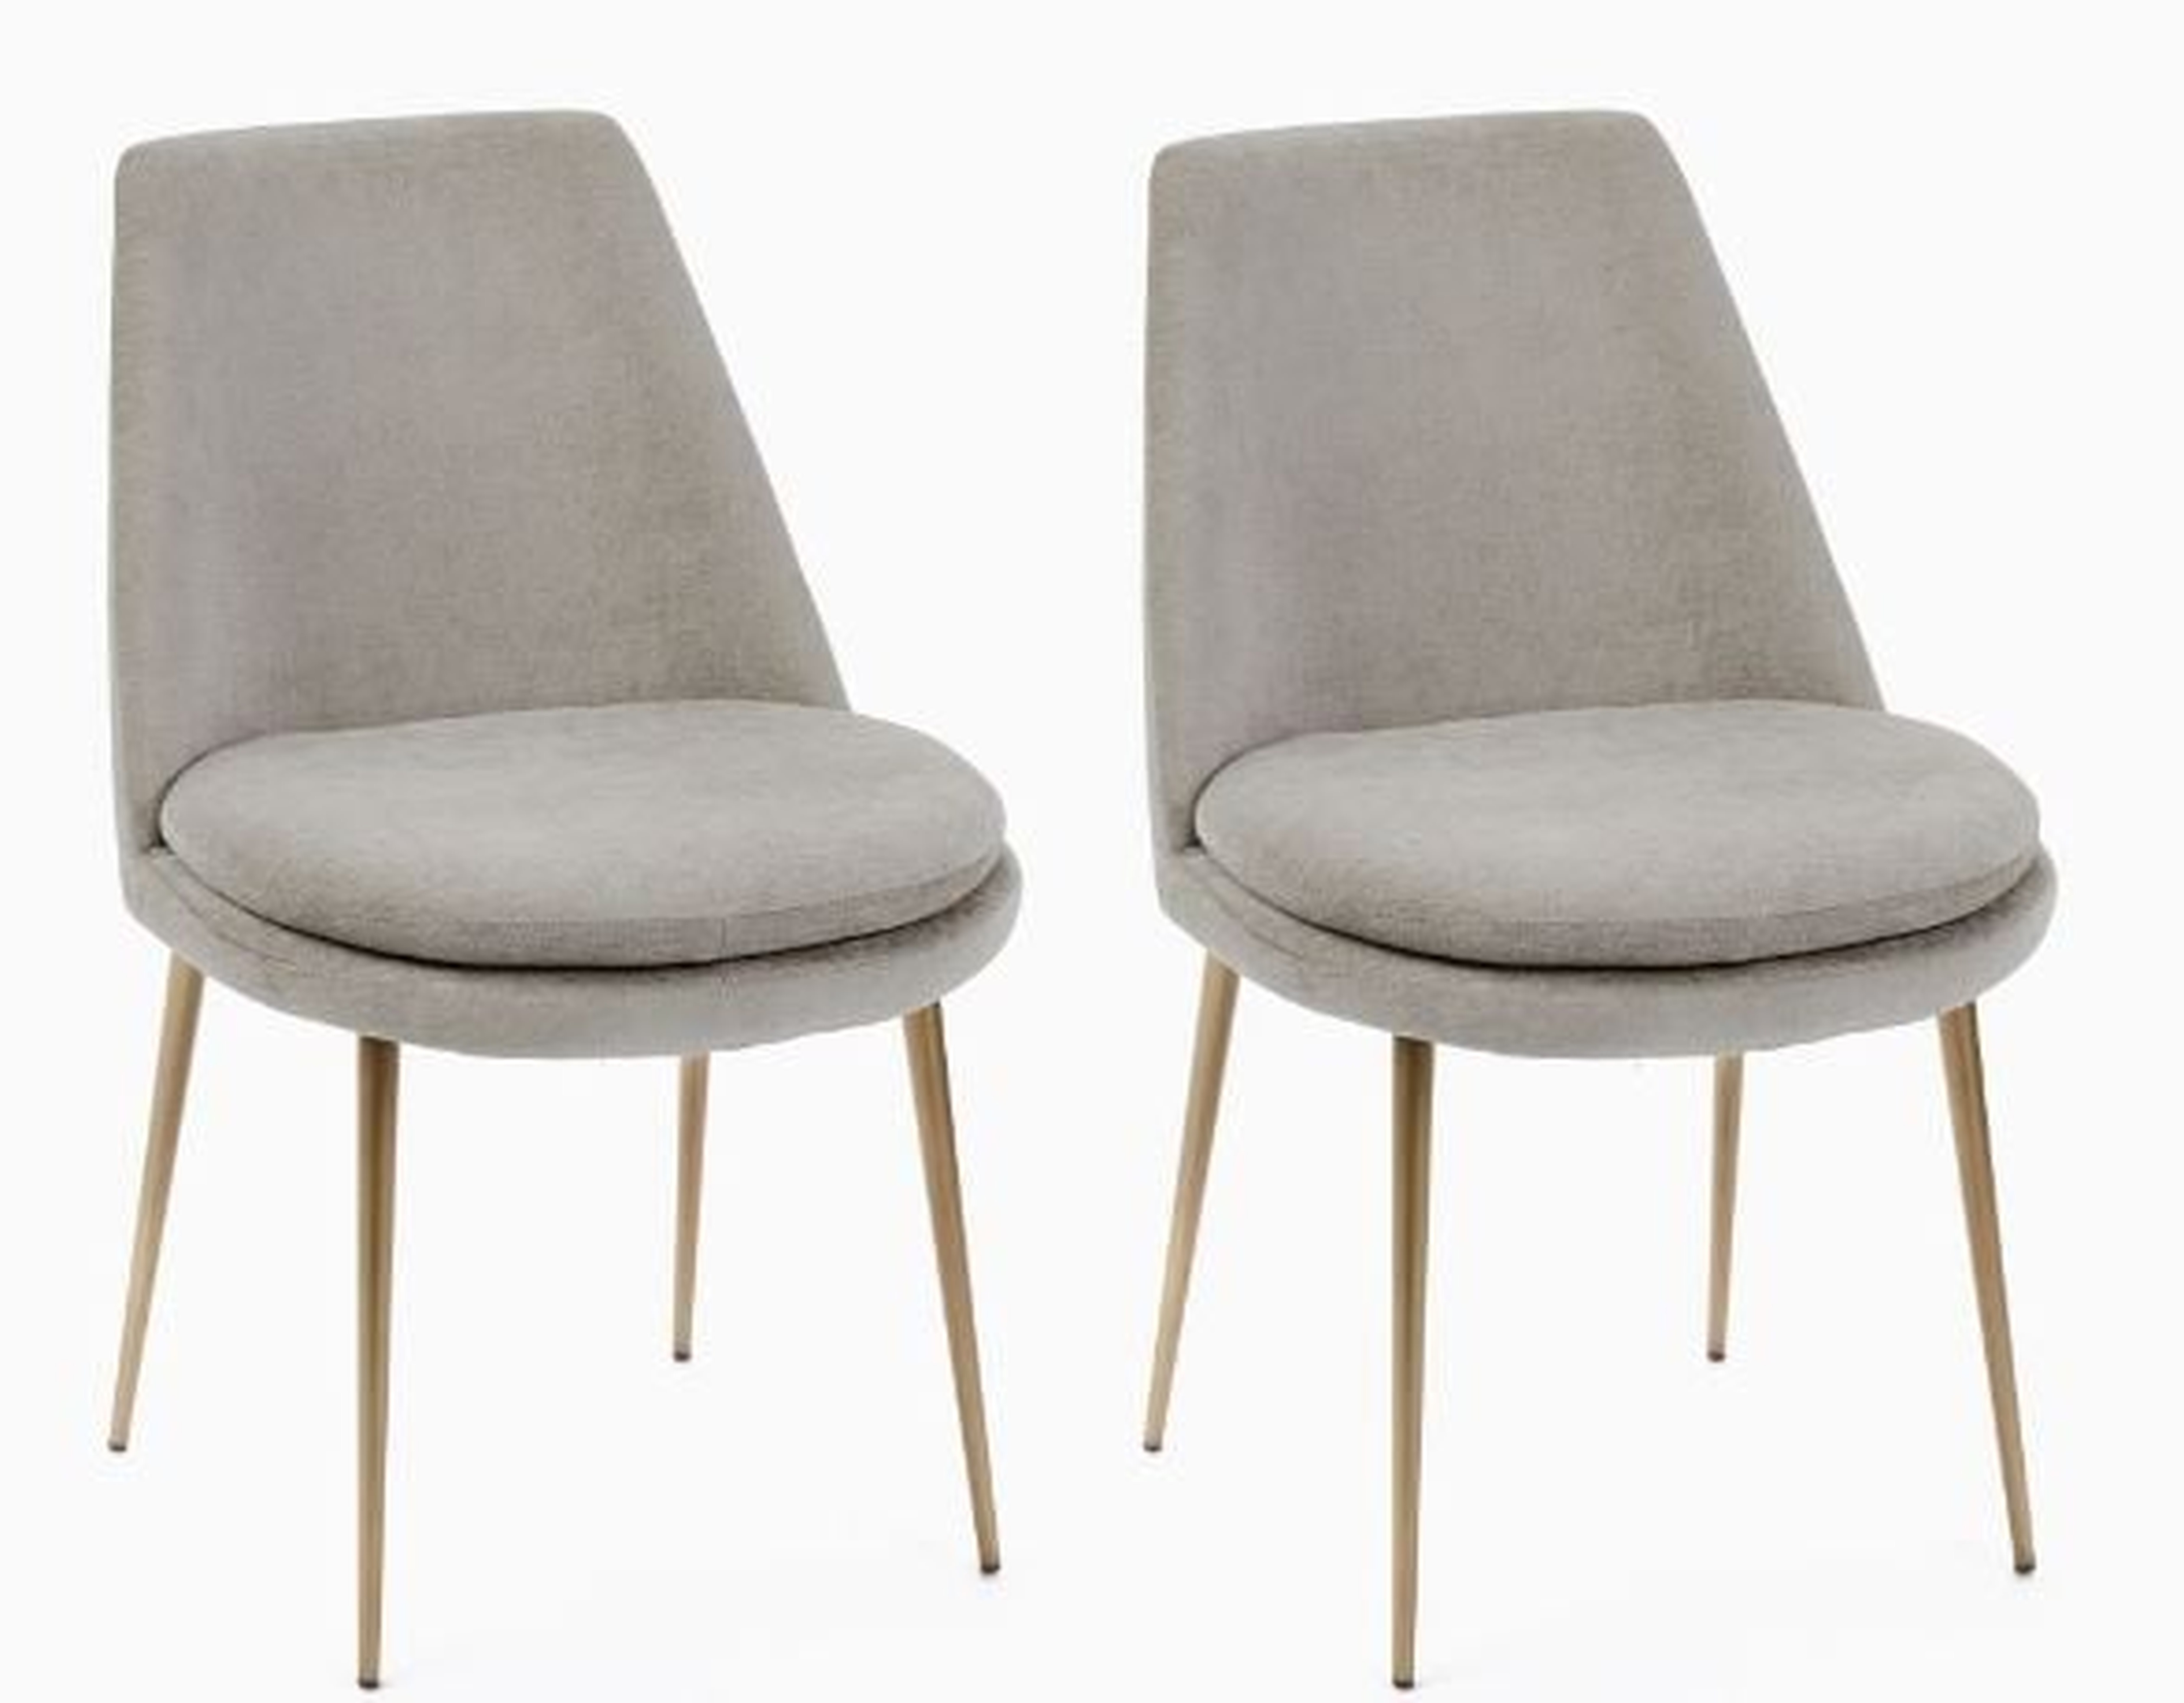 Finley Low-Back Upholstered Dining Chair (Set of 2) - West Elm